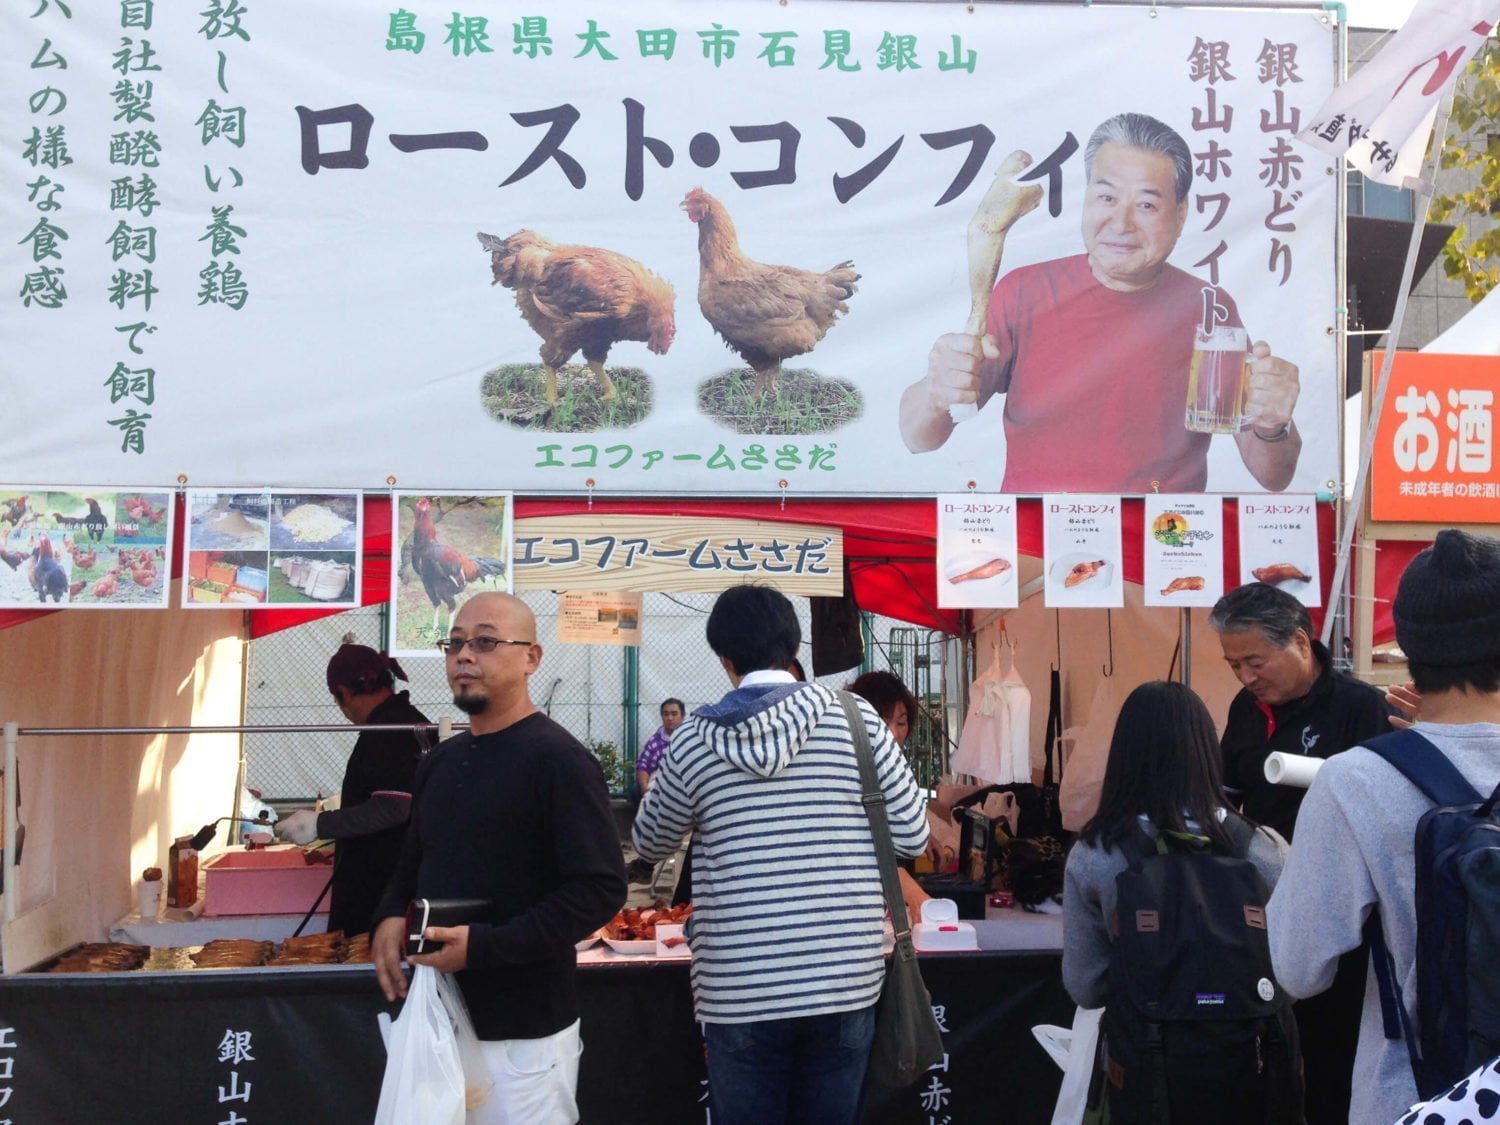 japanese grilled chicken stand and lineup at saijo sake festival